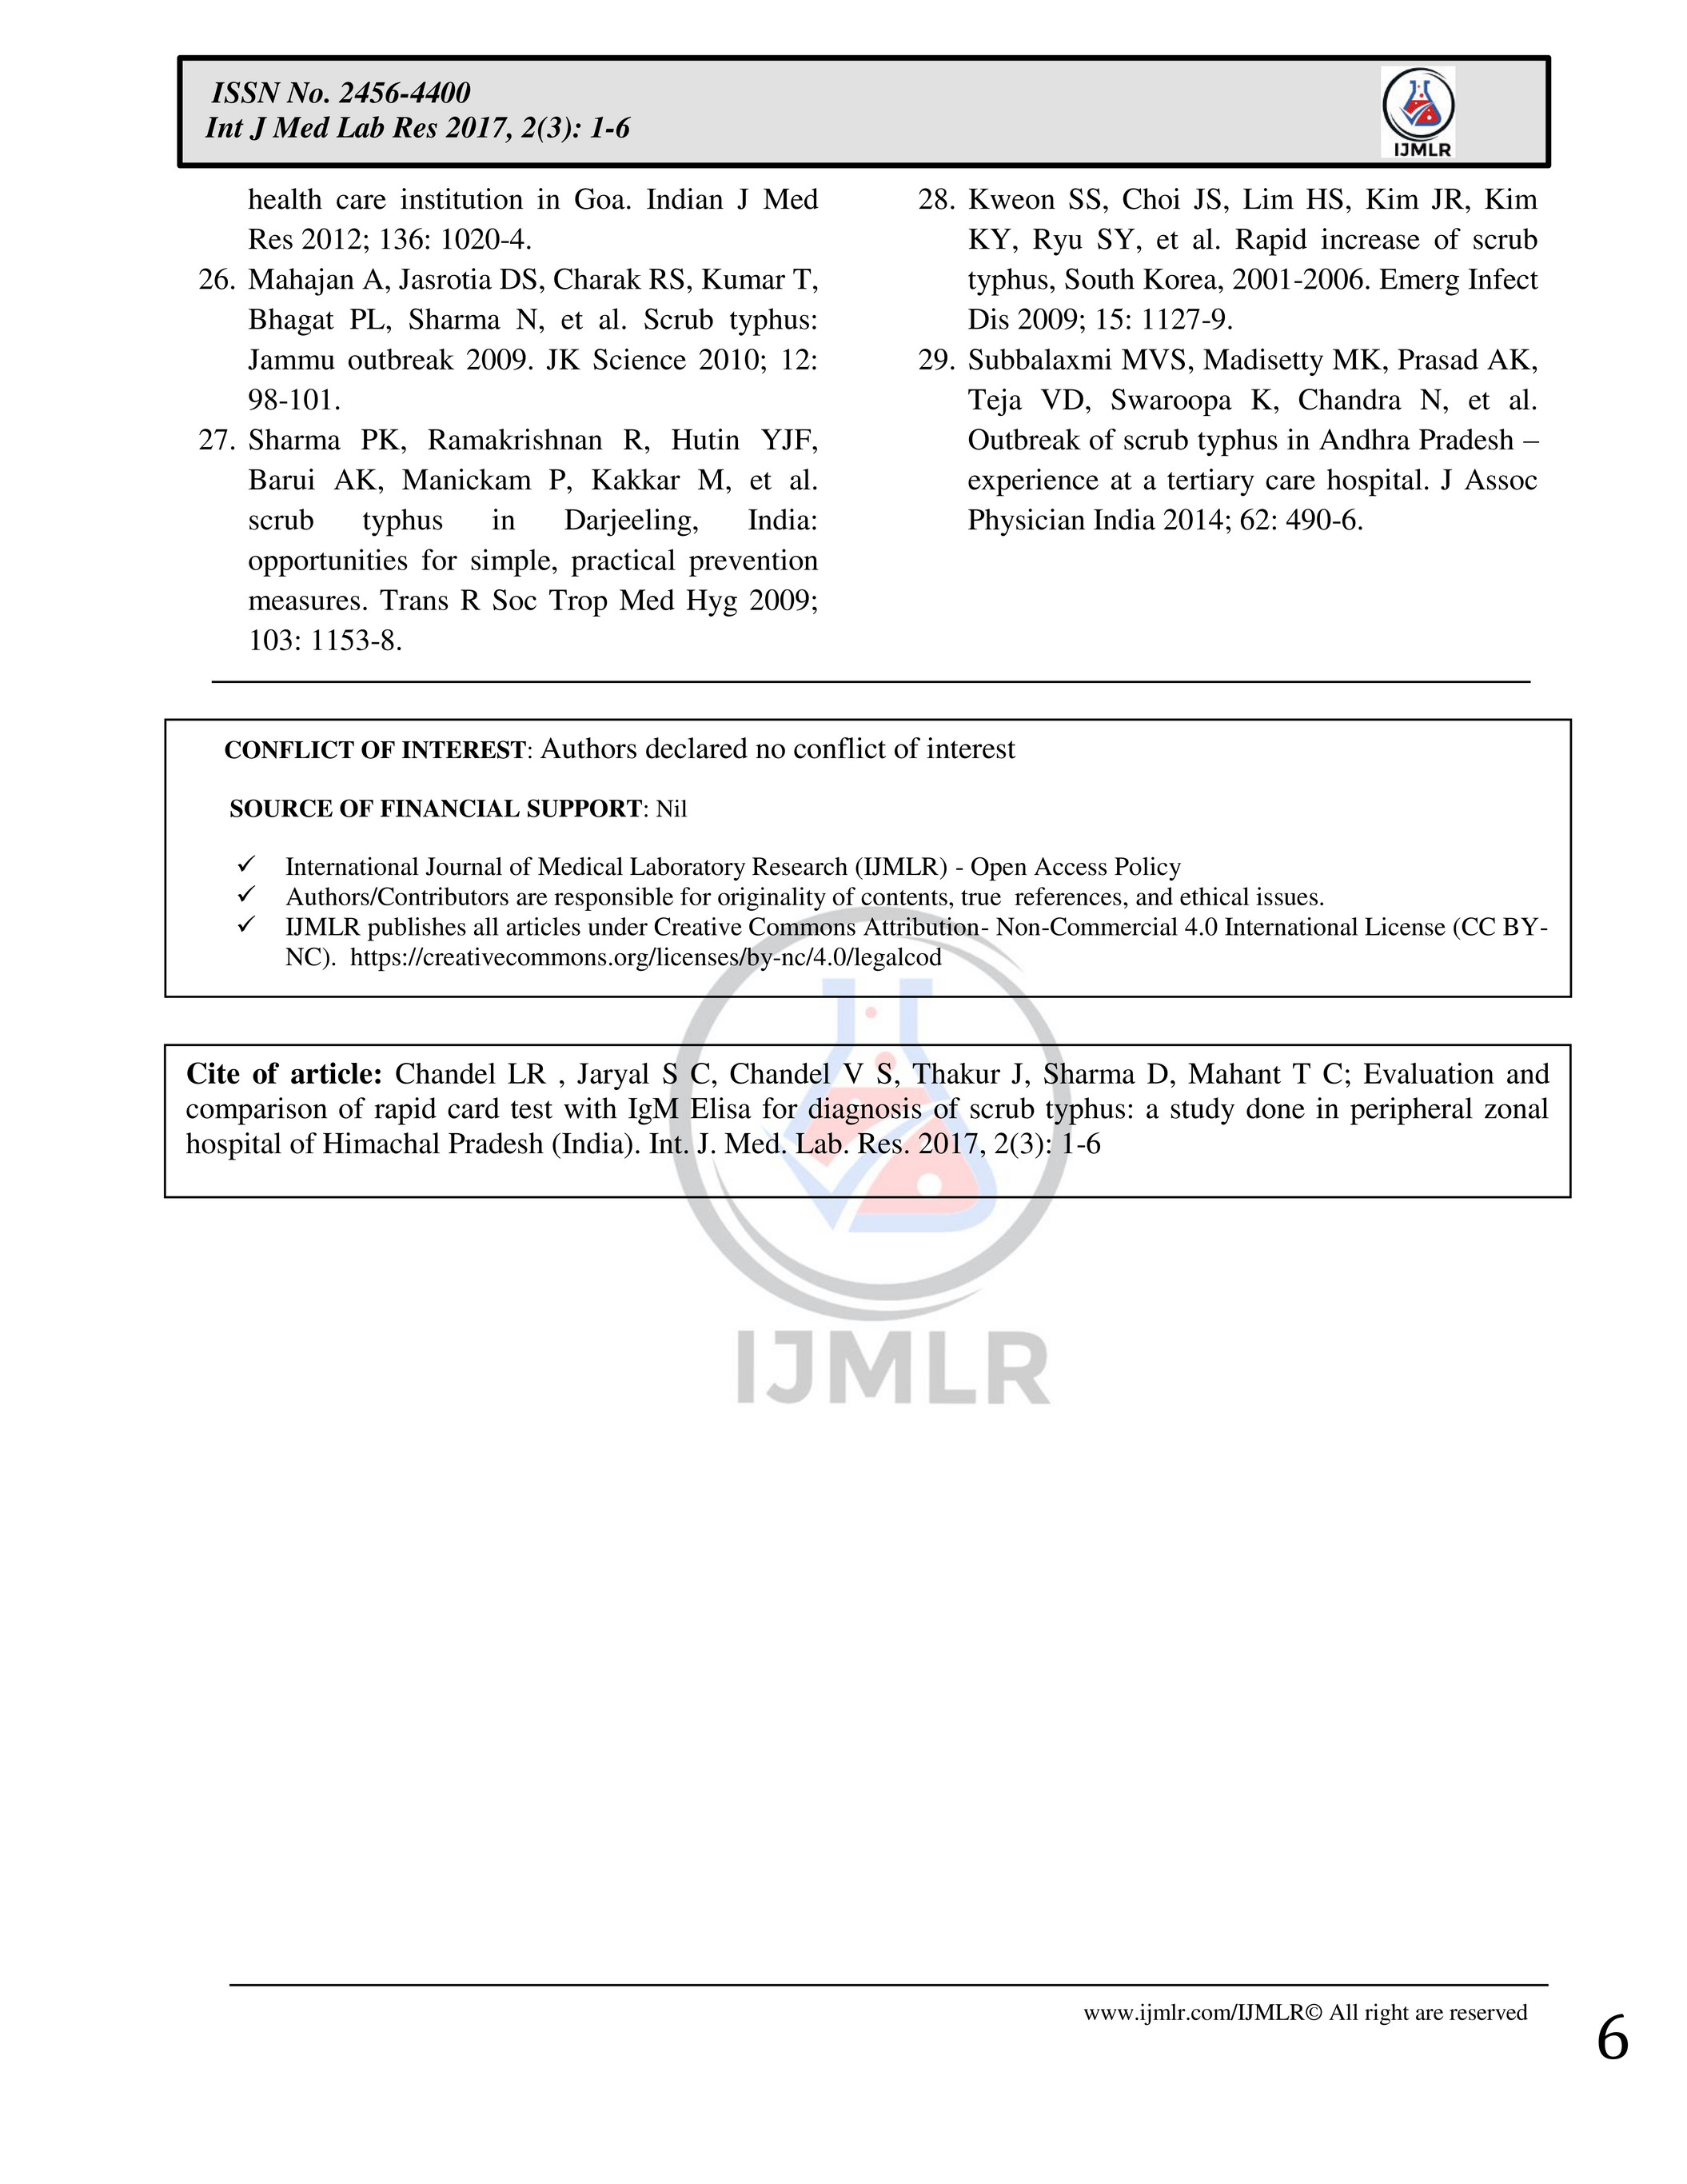 International Journal Of Medical Laboratory Research Ijmlr Page 6 Created With Publitas Com